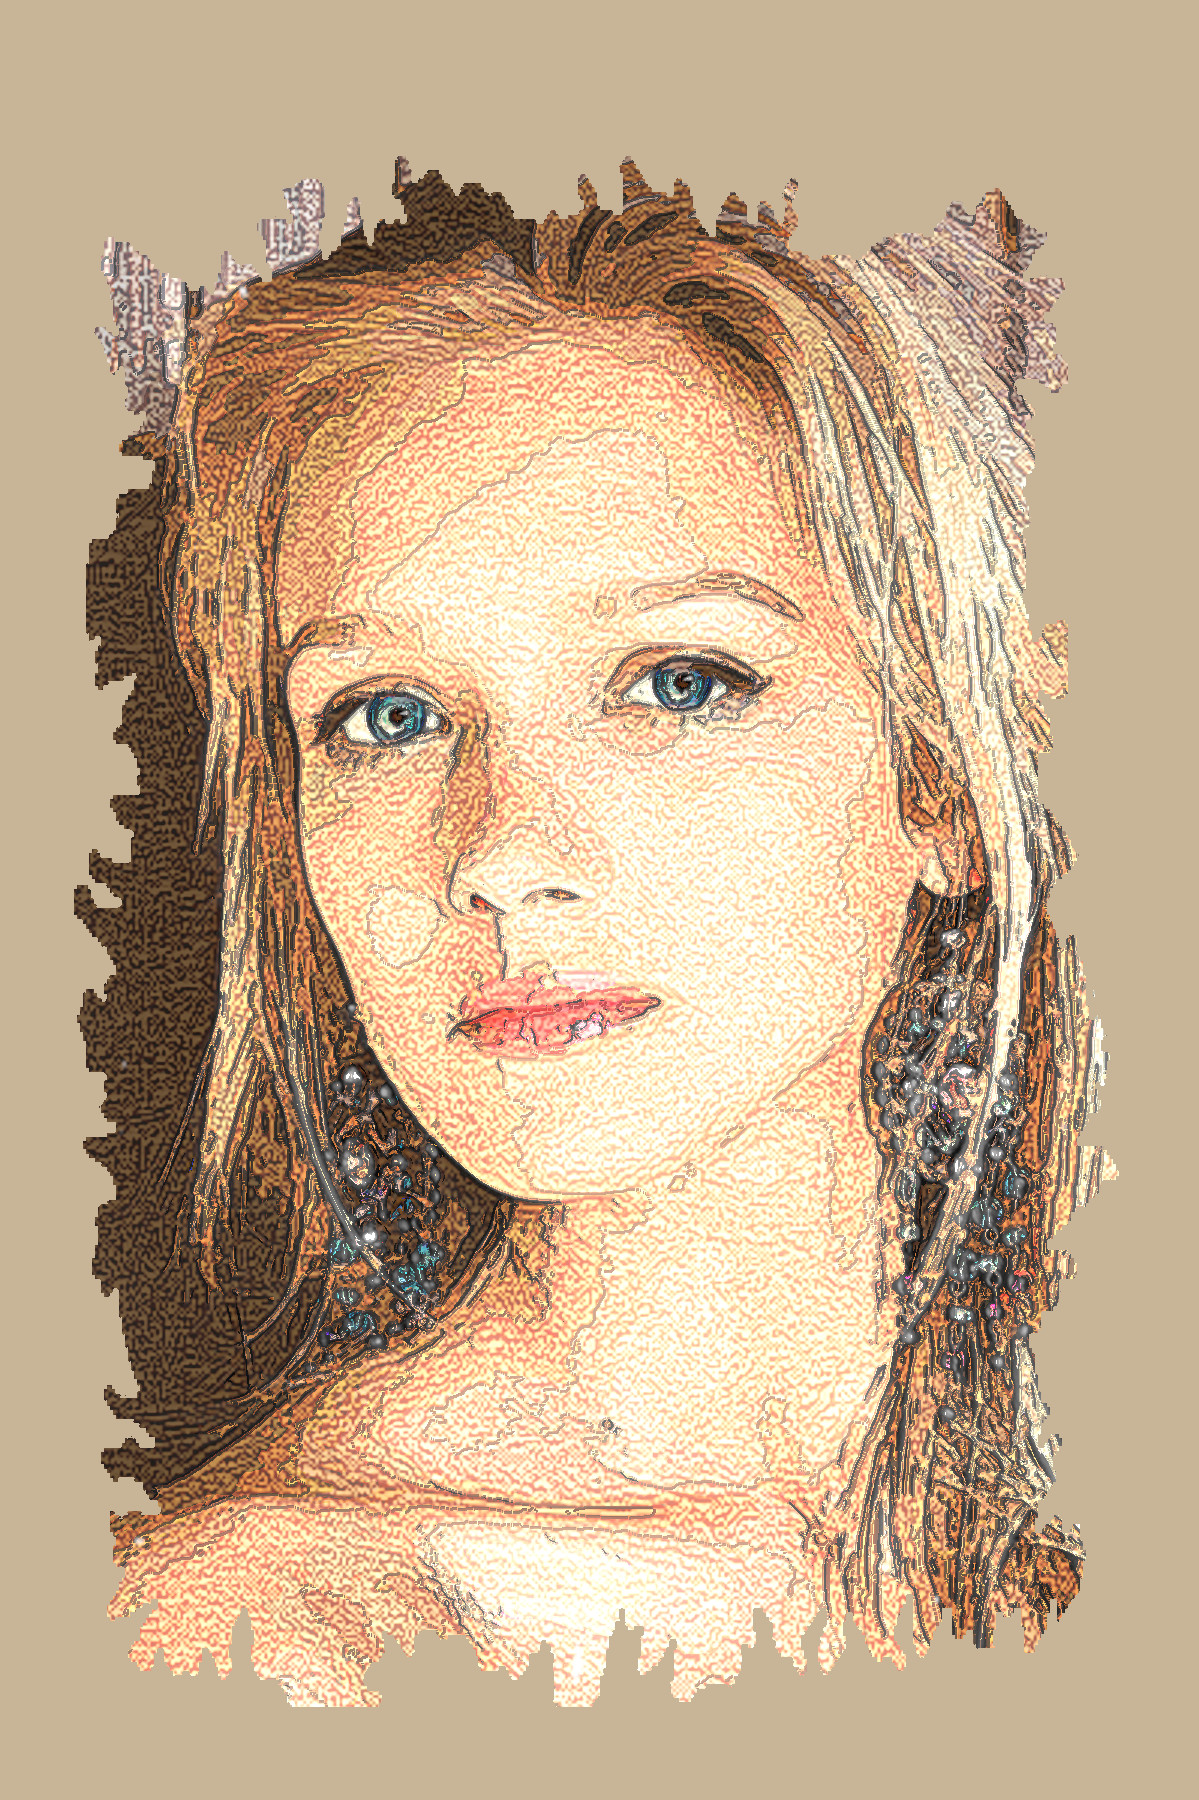 2022-01-11 14-42-01girl-2306829_1280 as a drawing with texture coloree (BC2X) (lines look regular) (lines look 2 undefined) (texture colour used [165,125,94]) (nr of areas 255).jpeg